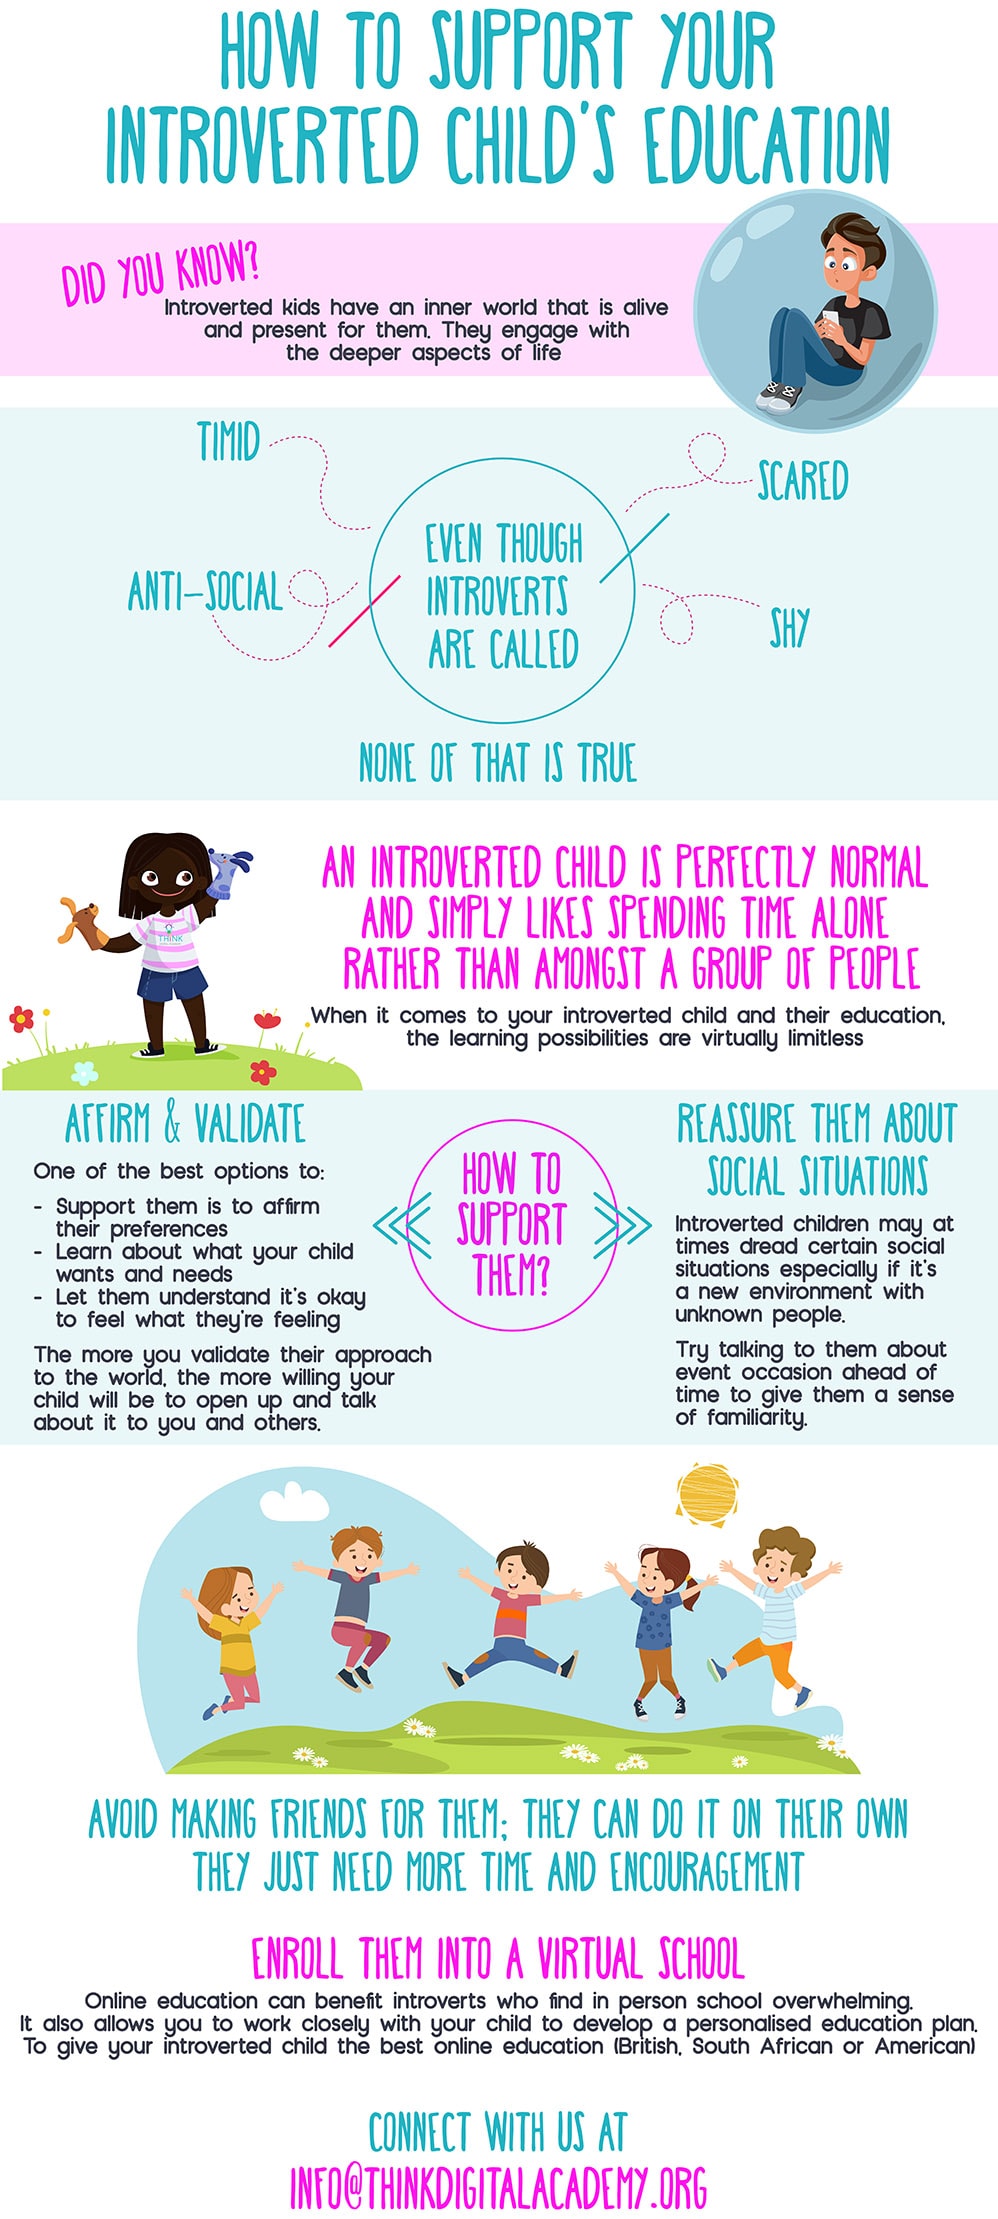 Infographic on how to support your introverted child's education